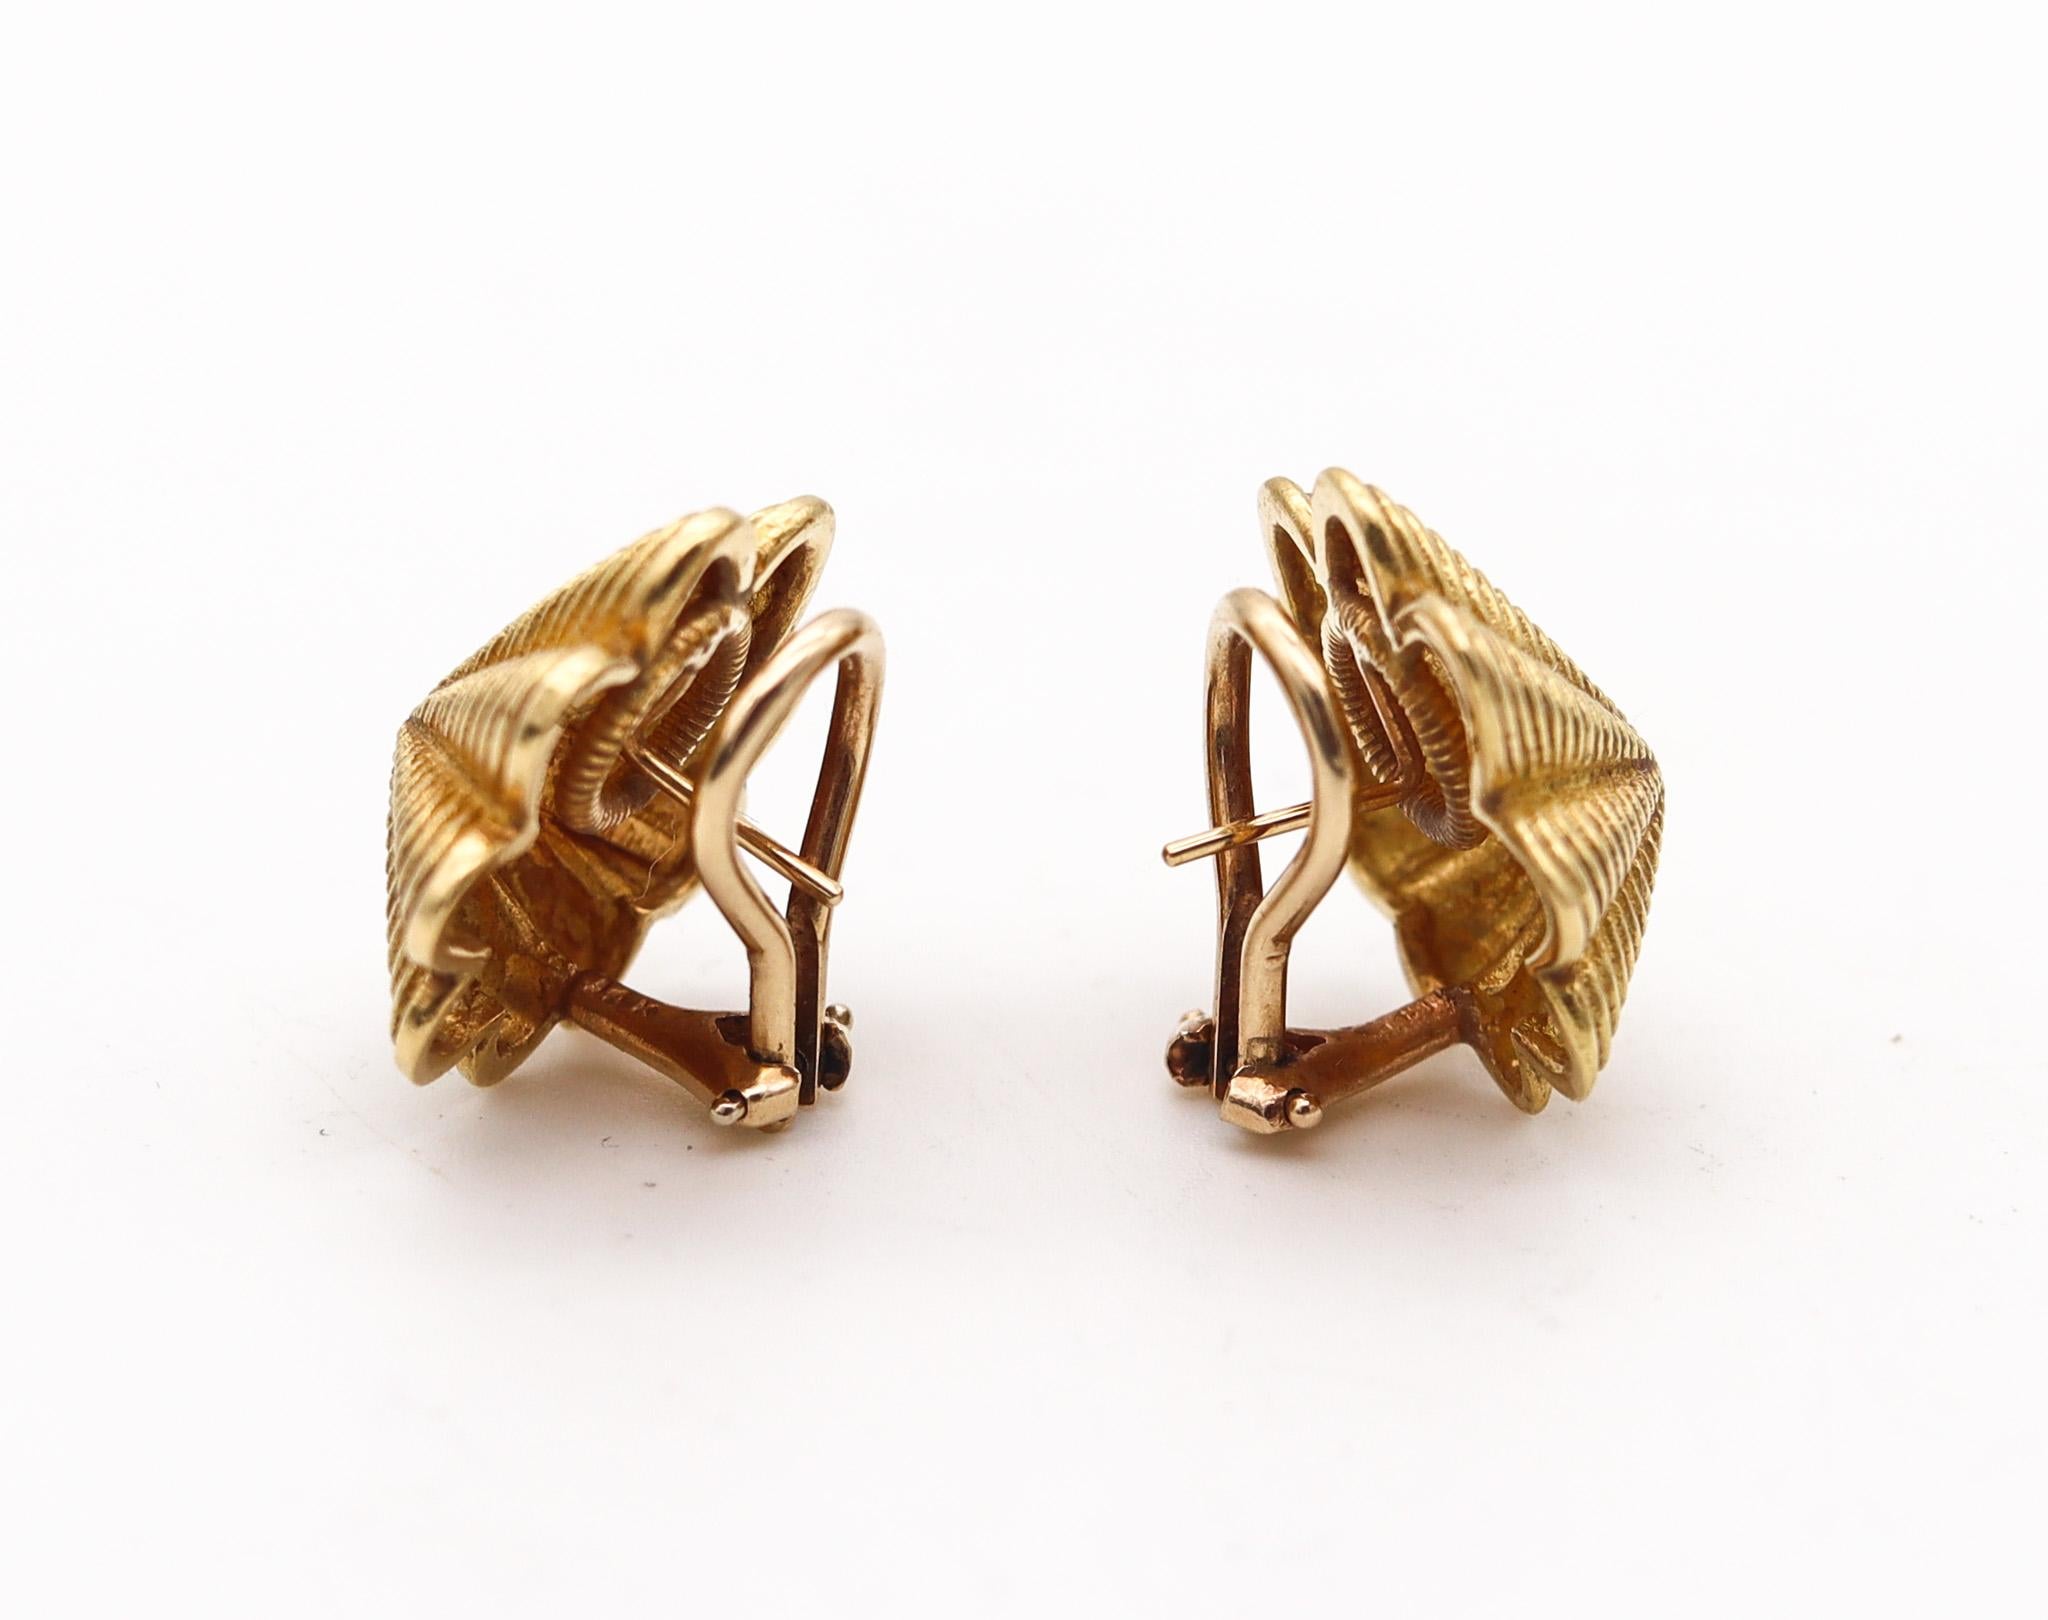 Modernist Tiffany & Co. 1970 Schlumberger Scalloped Clips-On Earrings In 18Kt Yellow Gold For Sale